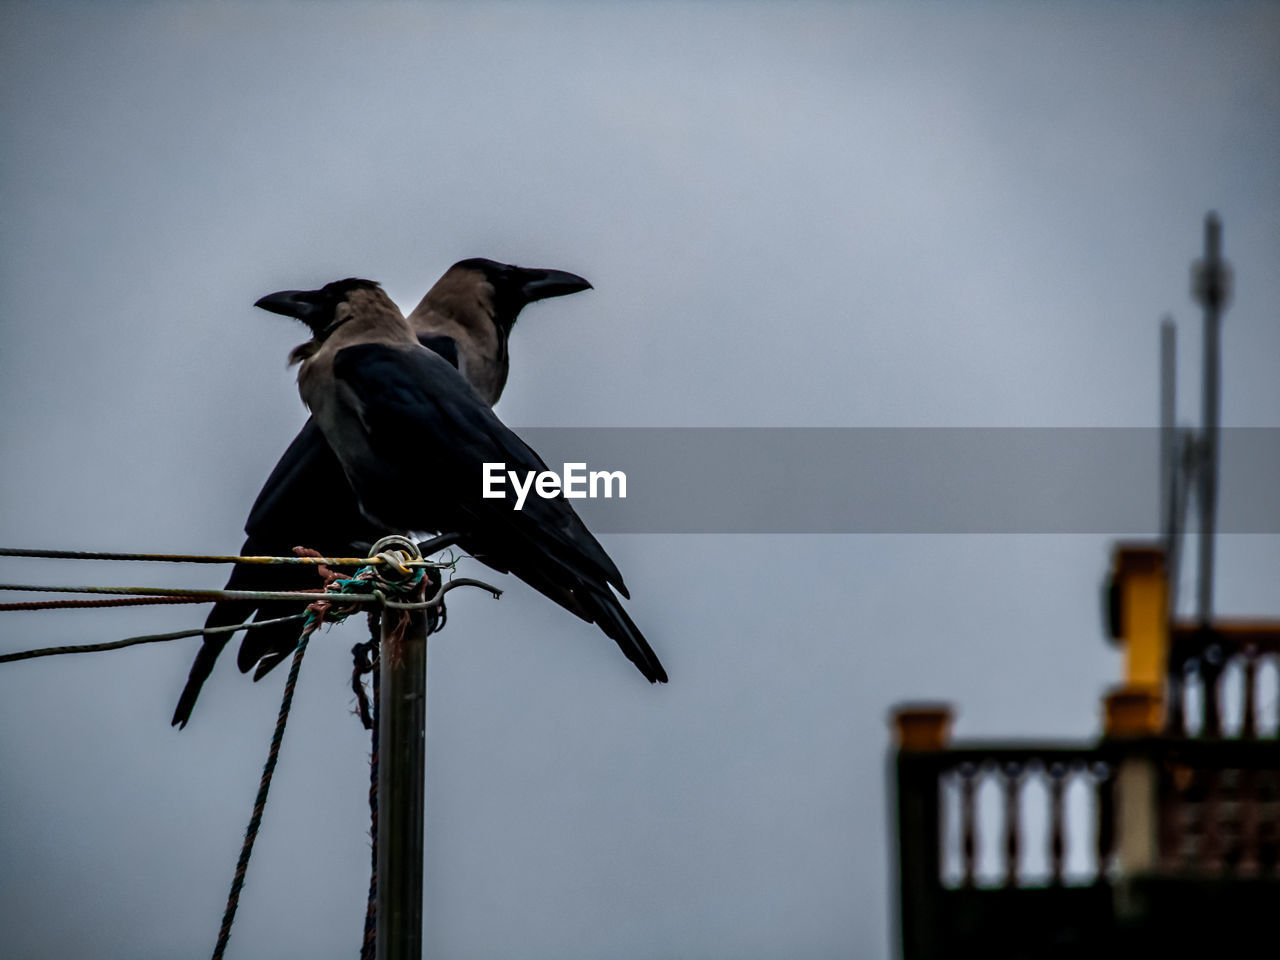 LOW ANGLE VIEW OF BIRD ON WOODEN POST AGAINST SKY